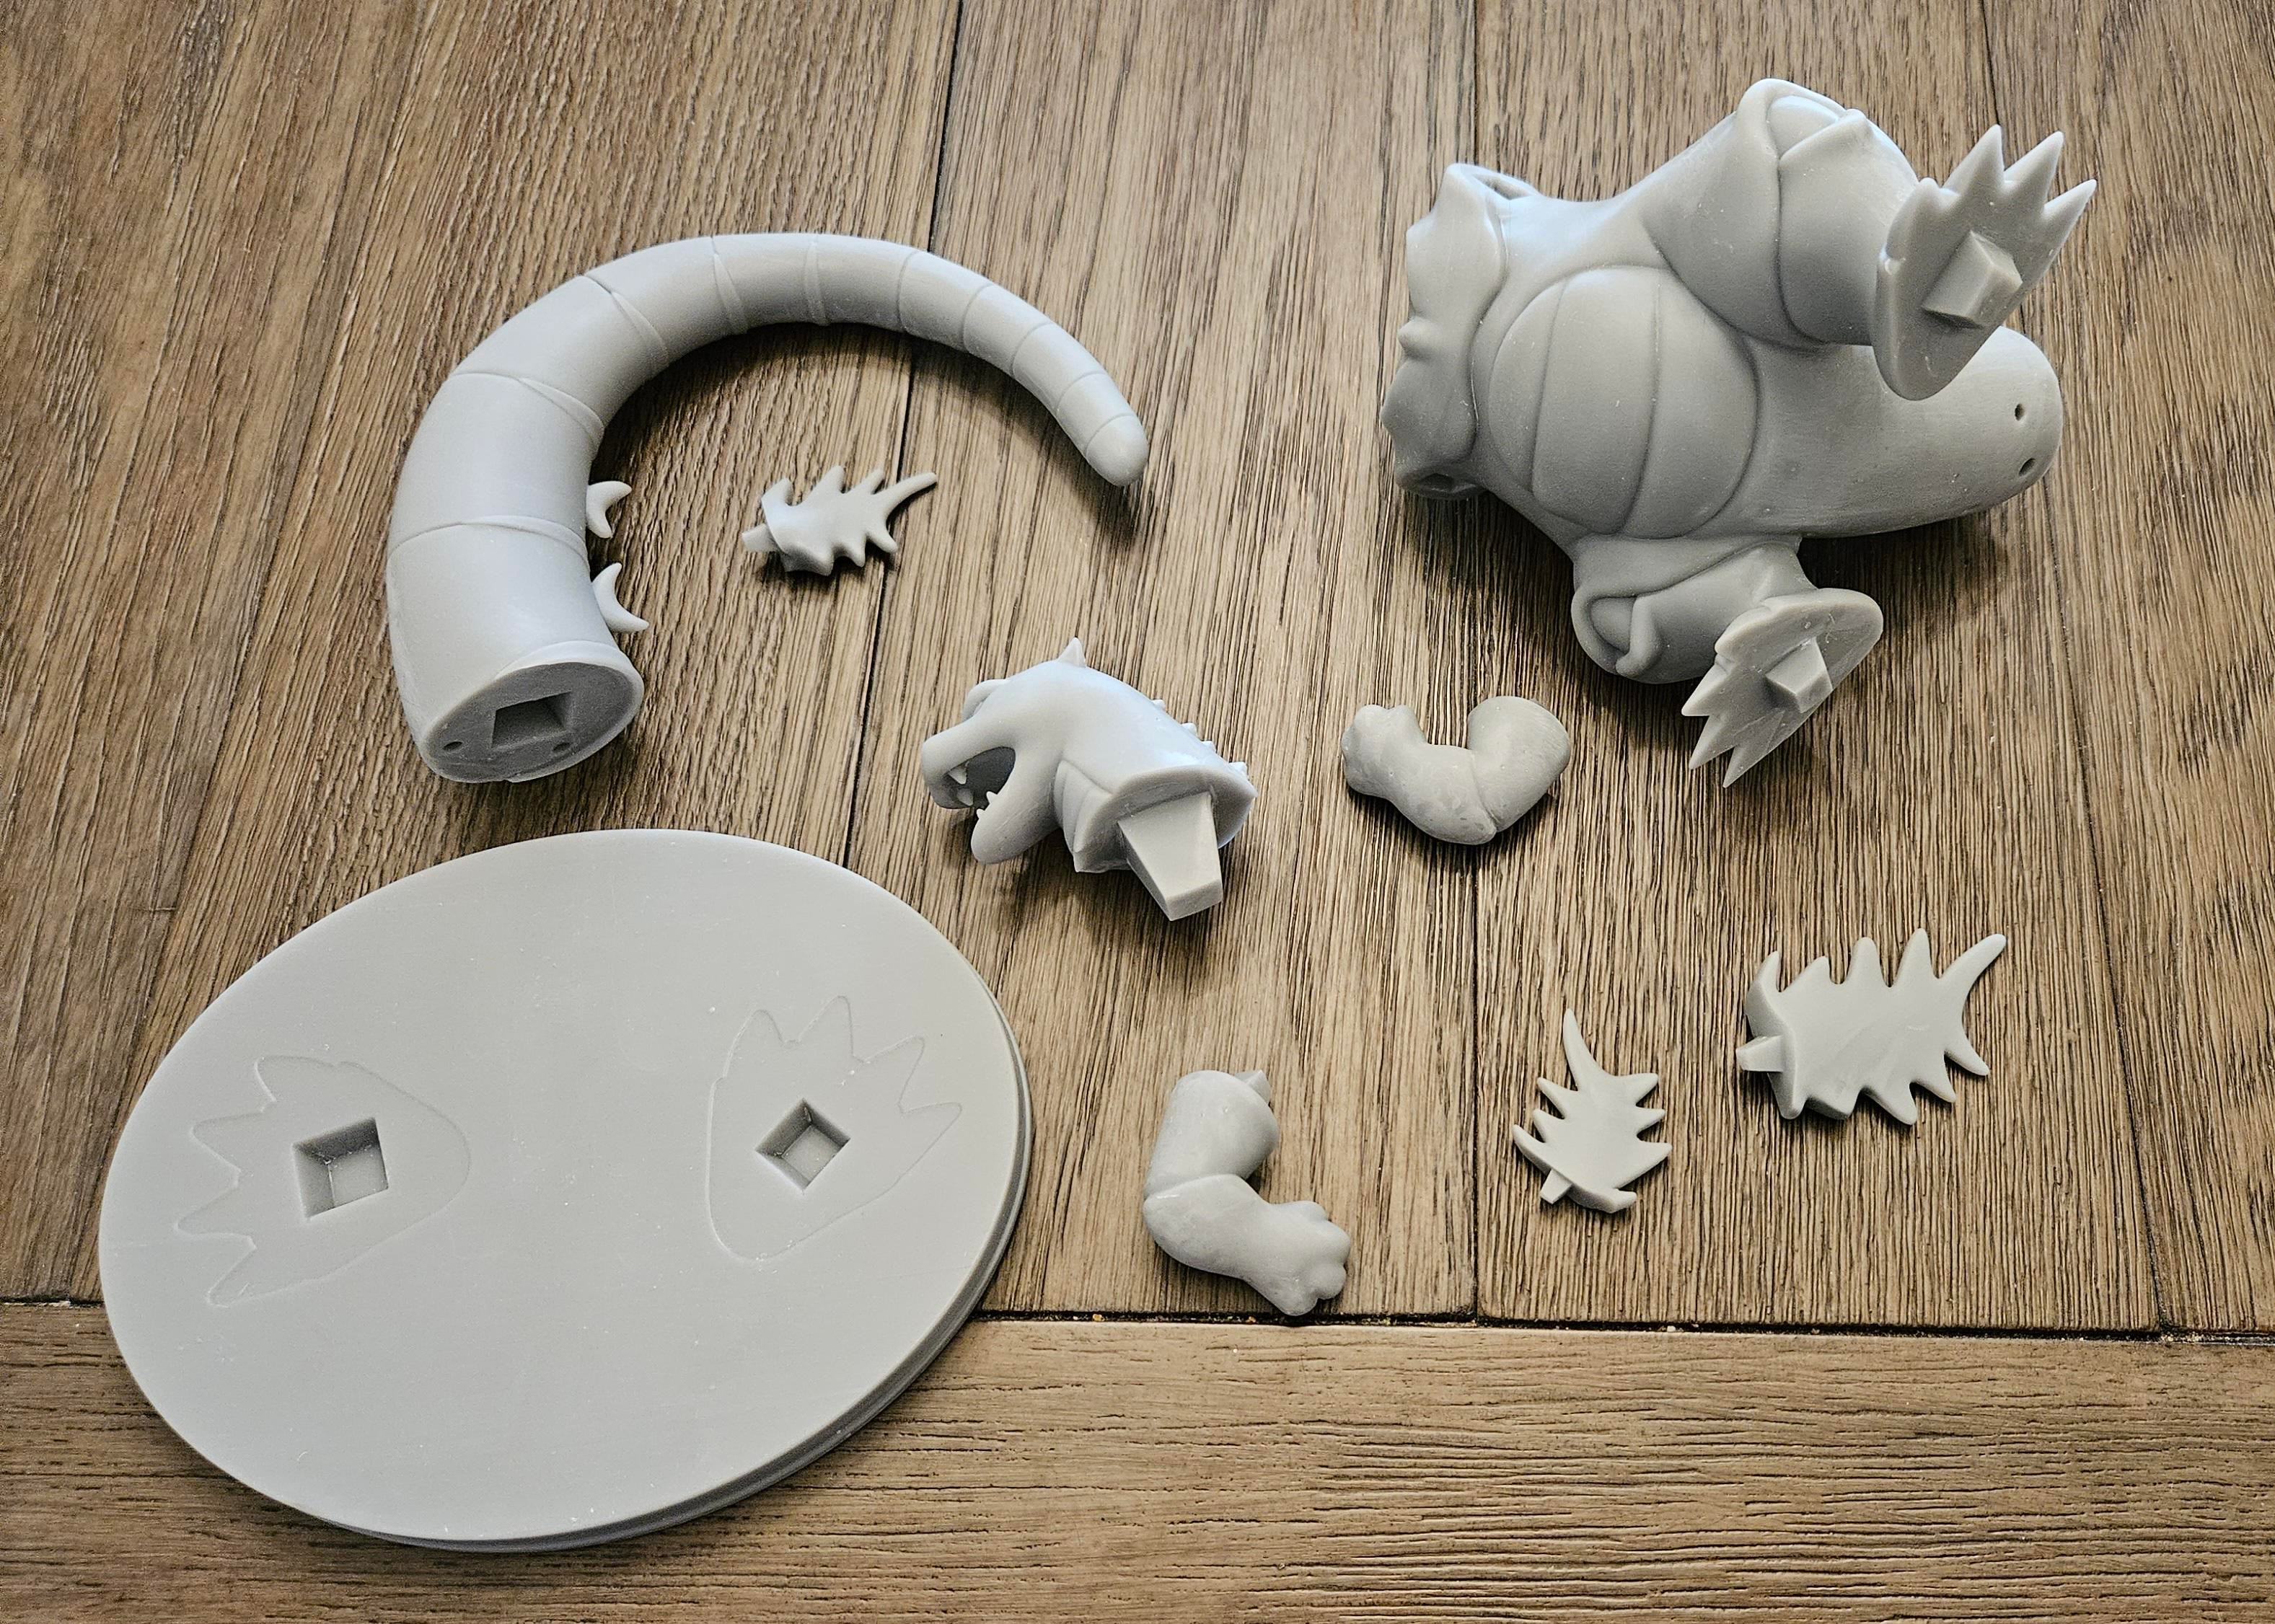 3D printed pieces before gluing and priming